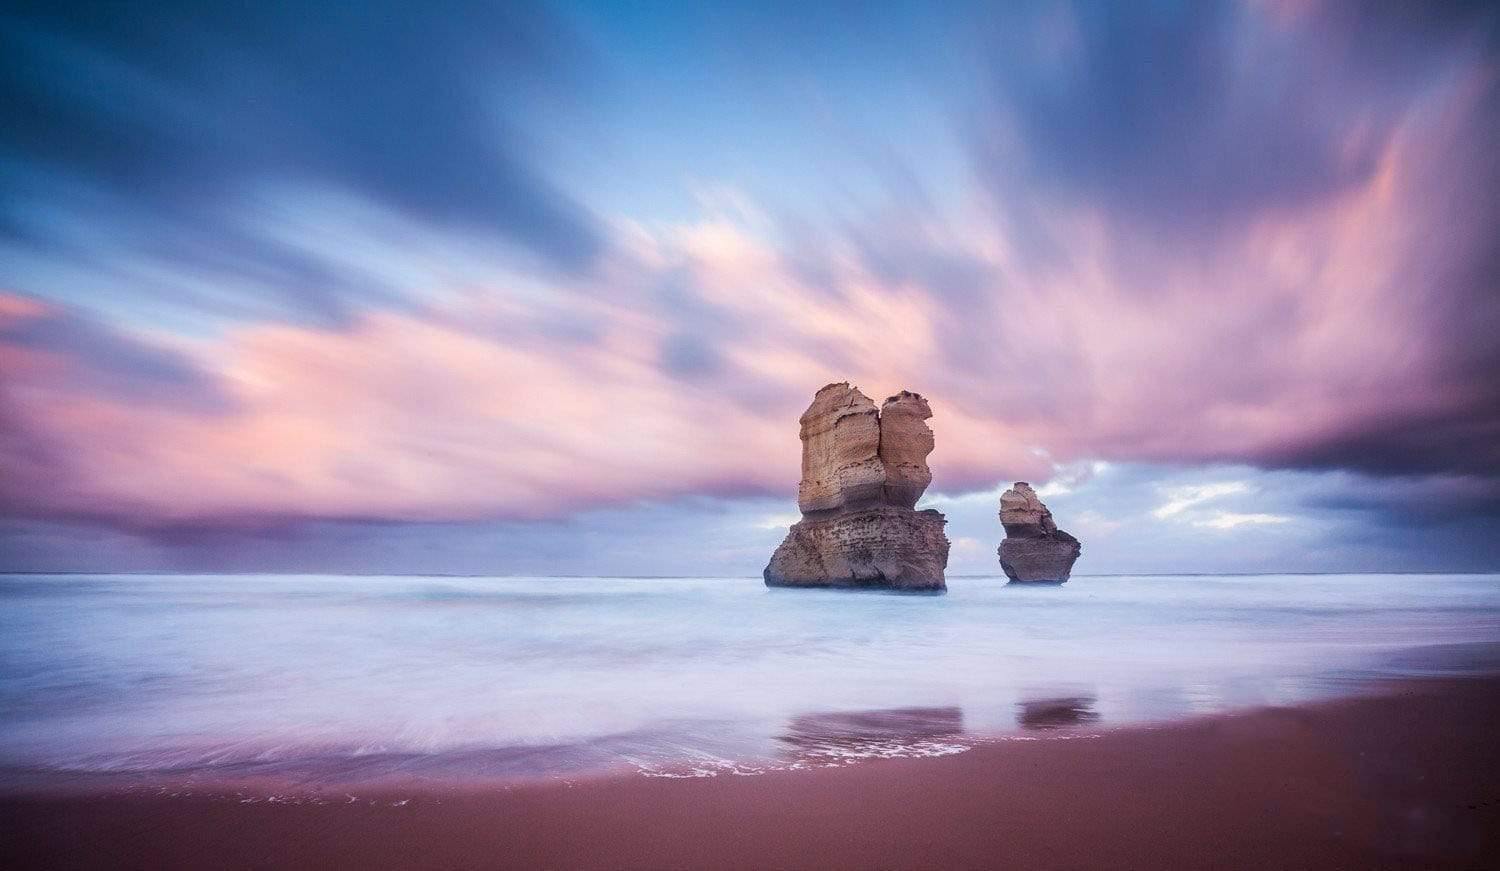 A standing couple of giant Stones with lilac-colored sky and shadow in the water, Standing Strong - Great Ocean Road VIC